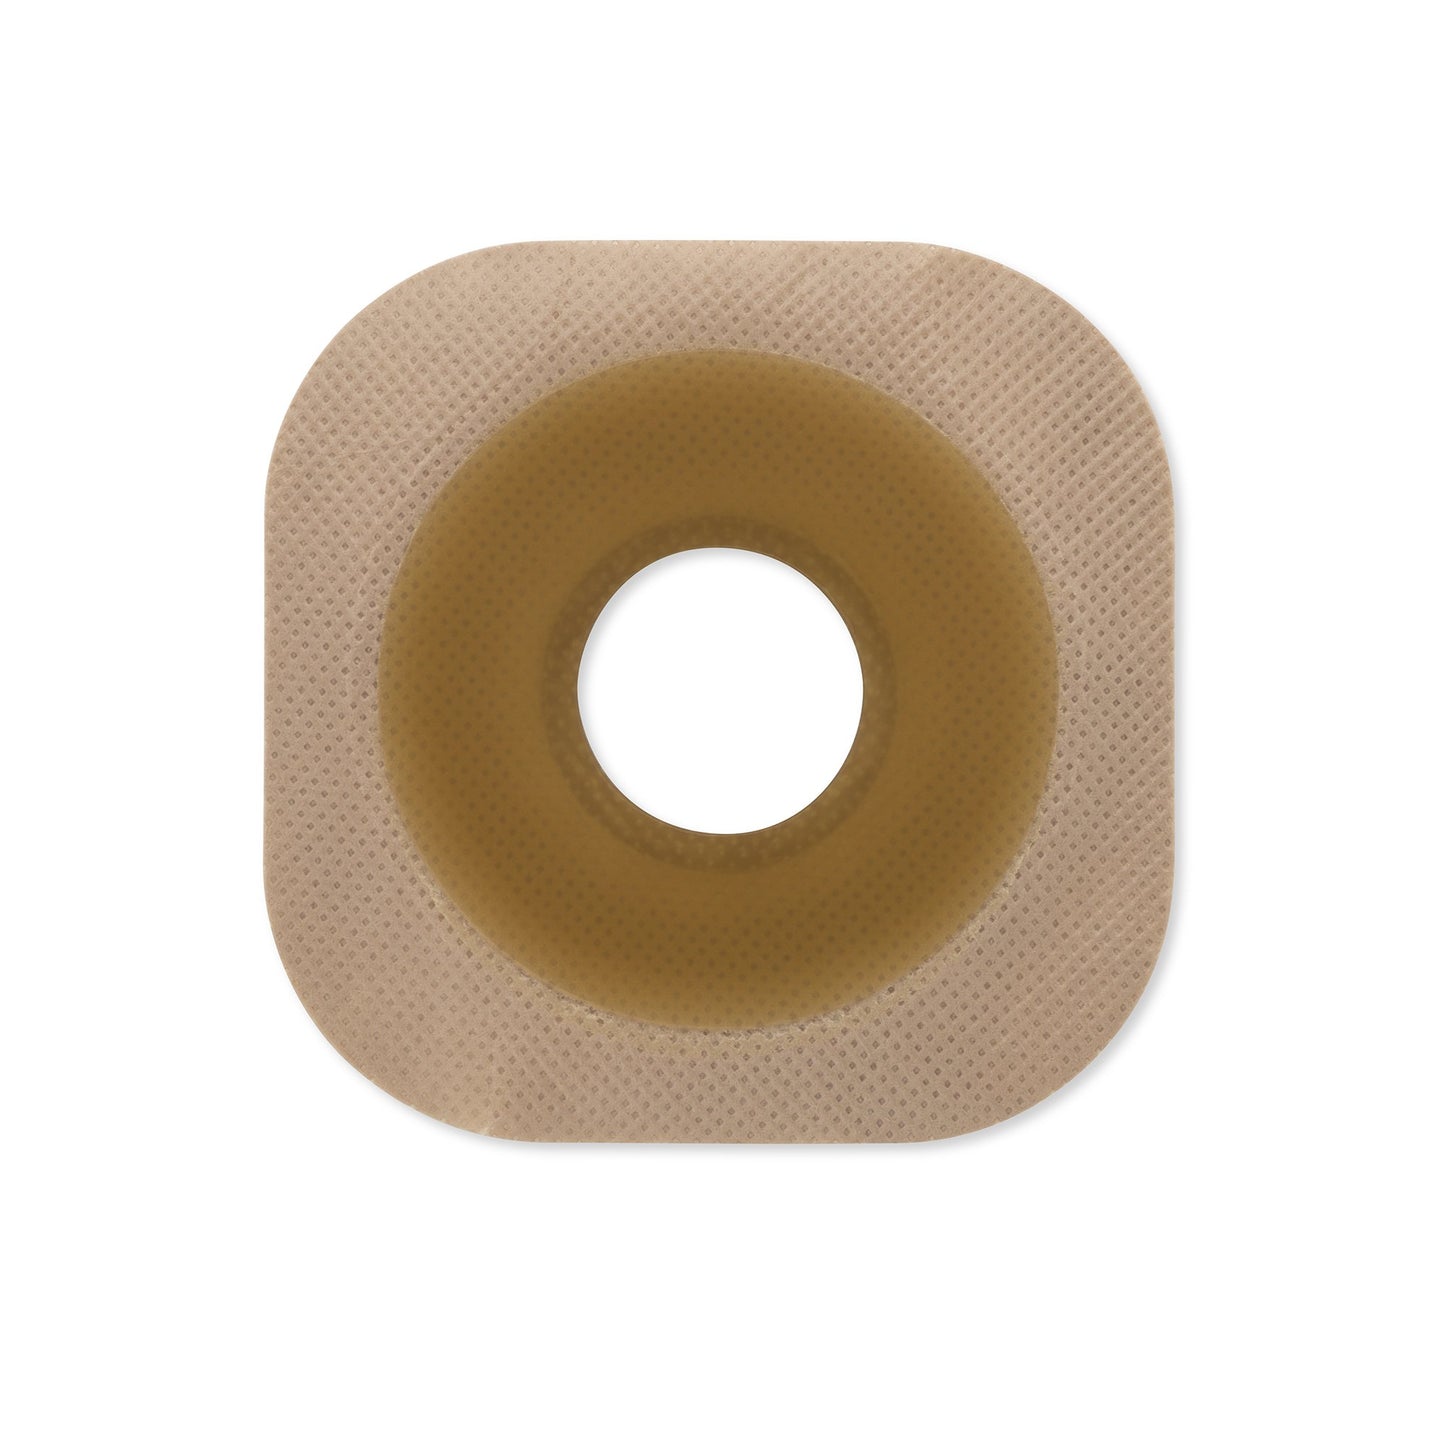 FlexTend™ Ostomy Barrier With Up to 1.75 Inch Stoma Opening, 5 ct